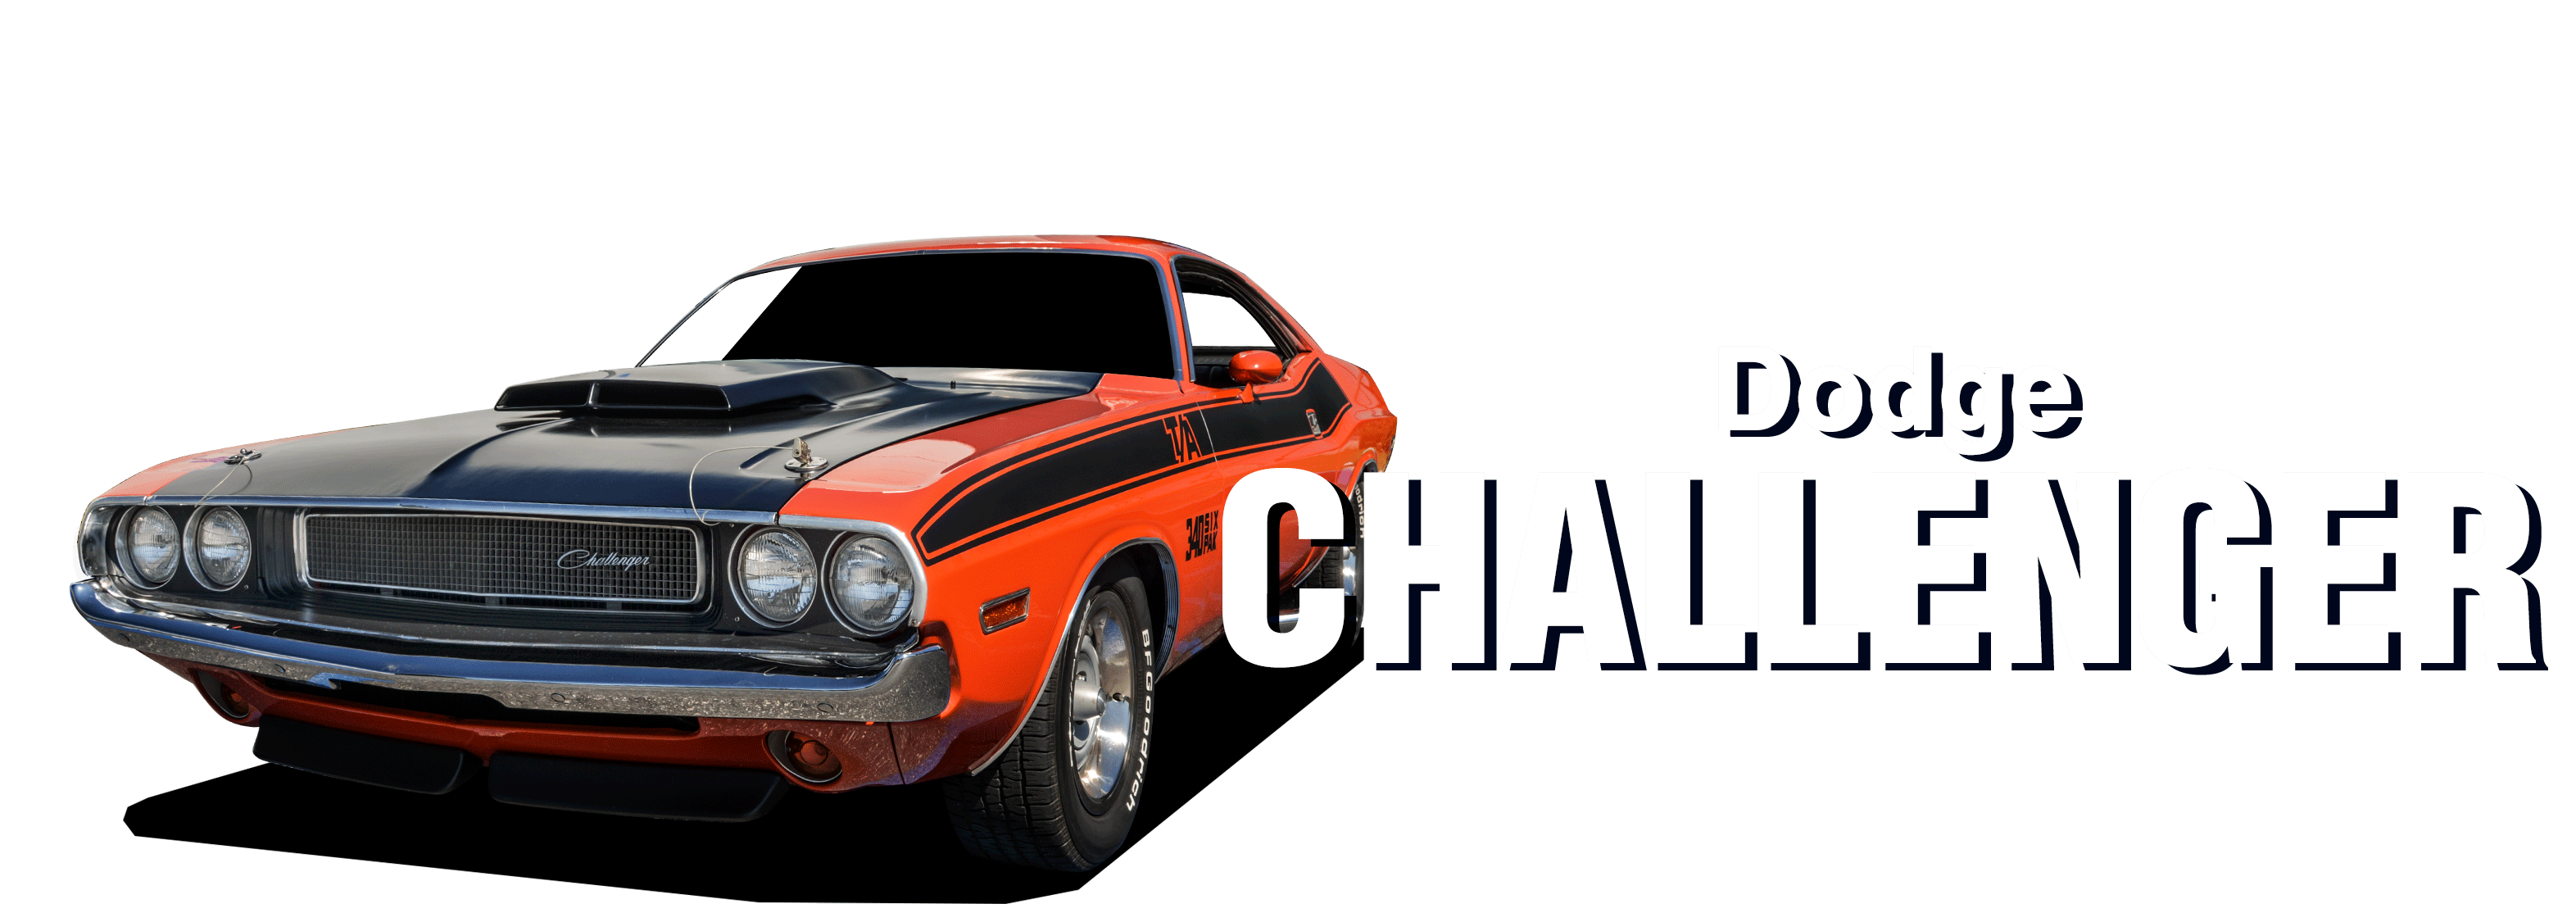 1970-1974 Dodge Challenger Parts and Accessories